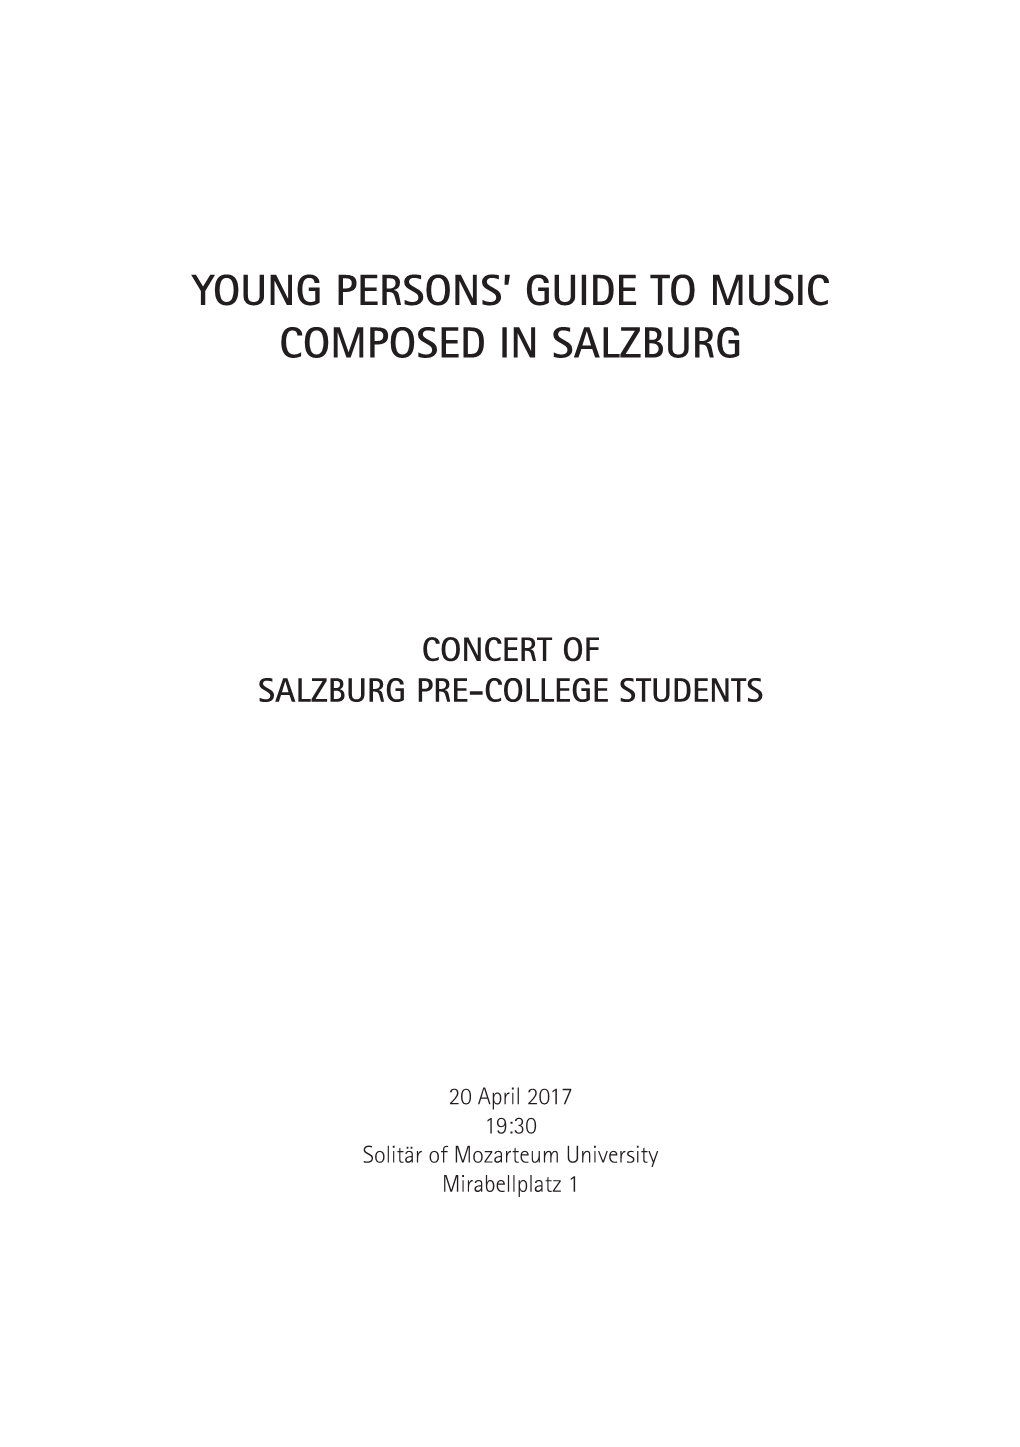 Young Persons' Guide to Music Composed in Salzburg